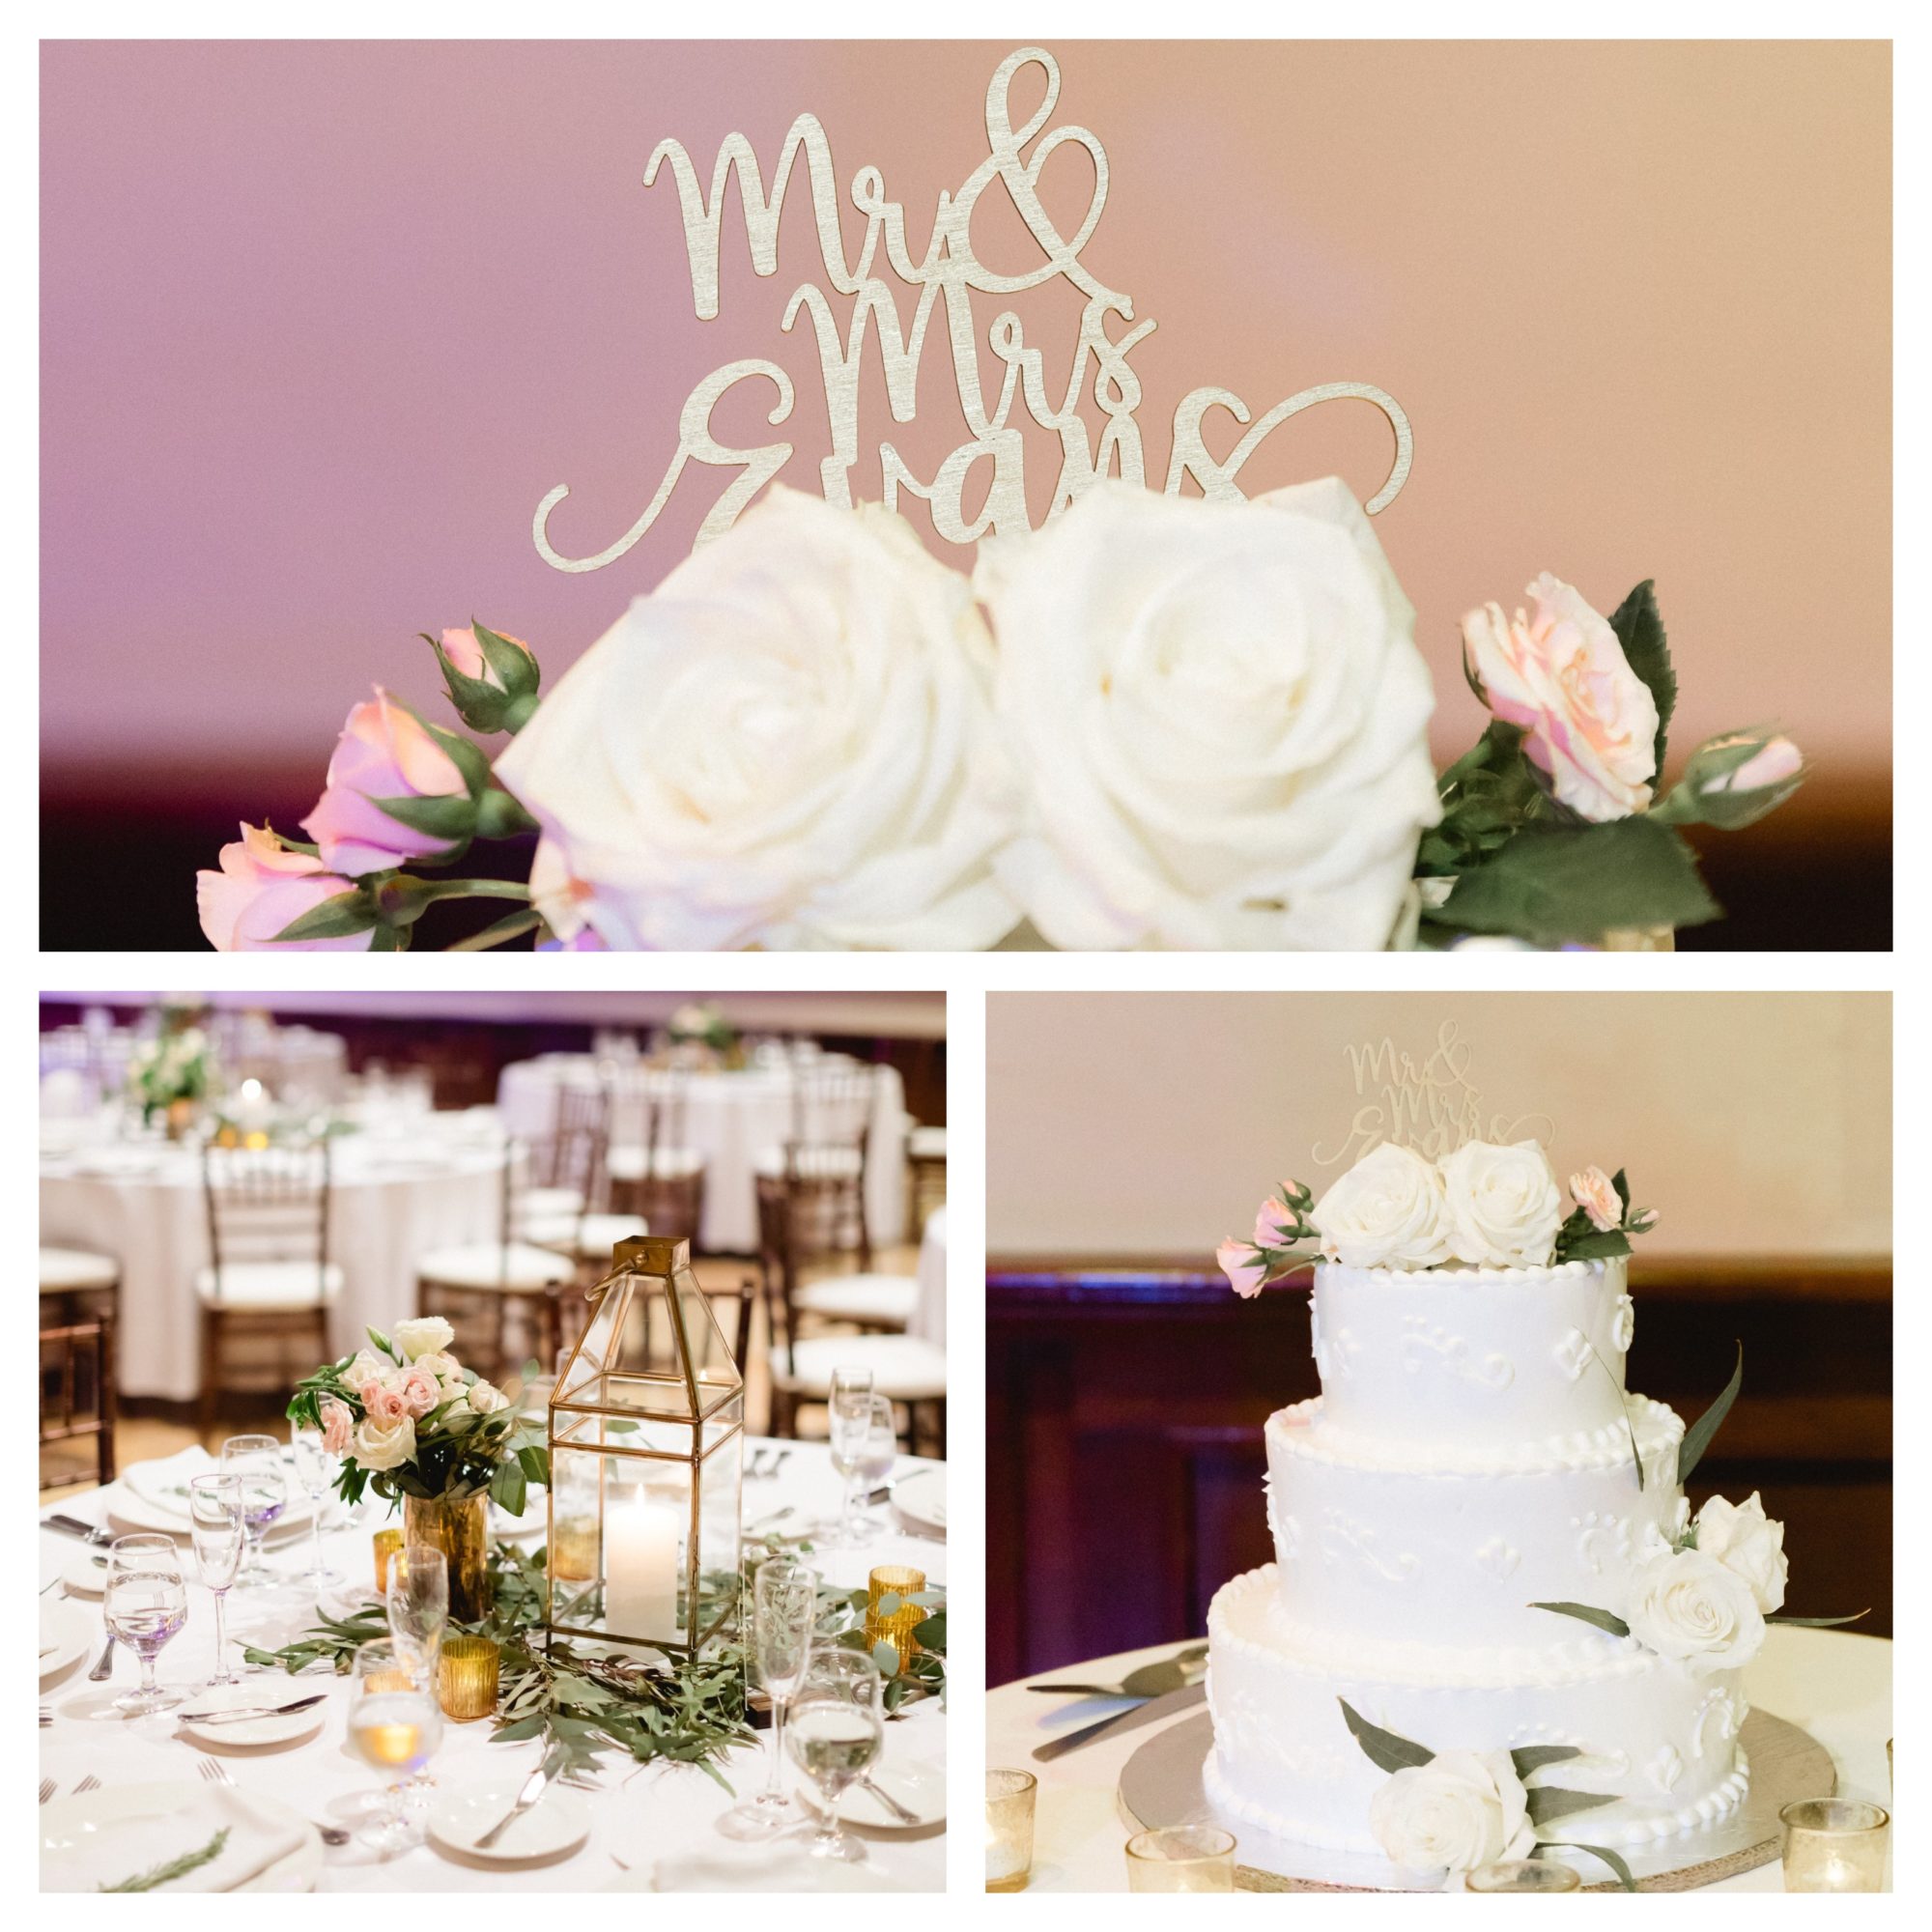 Weddings and events decoration details